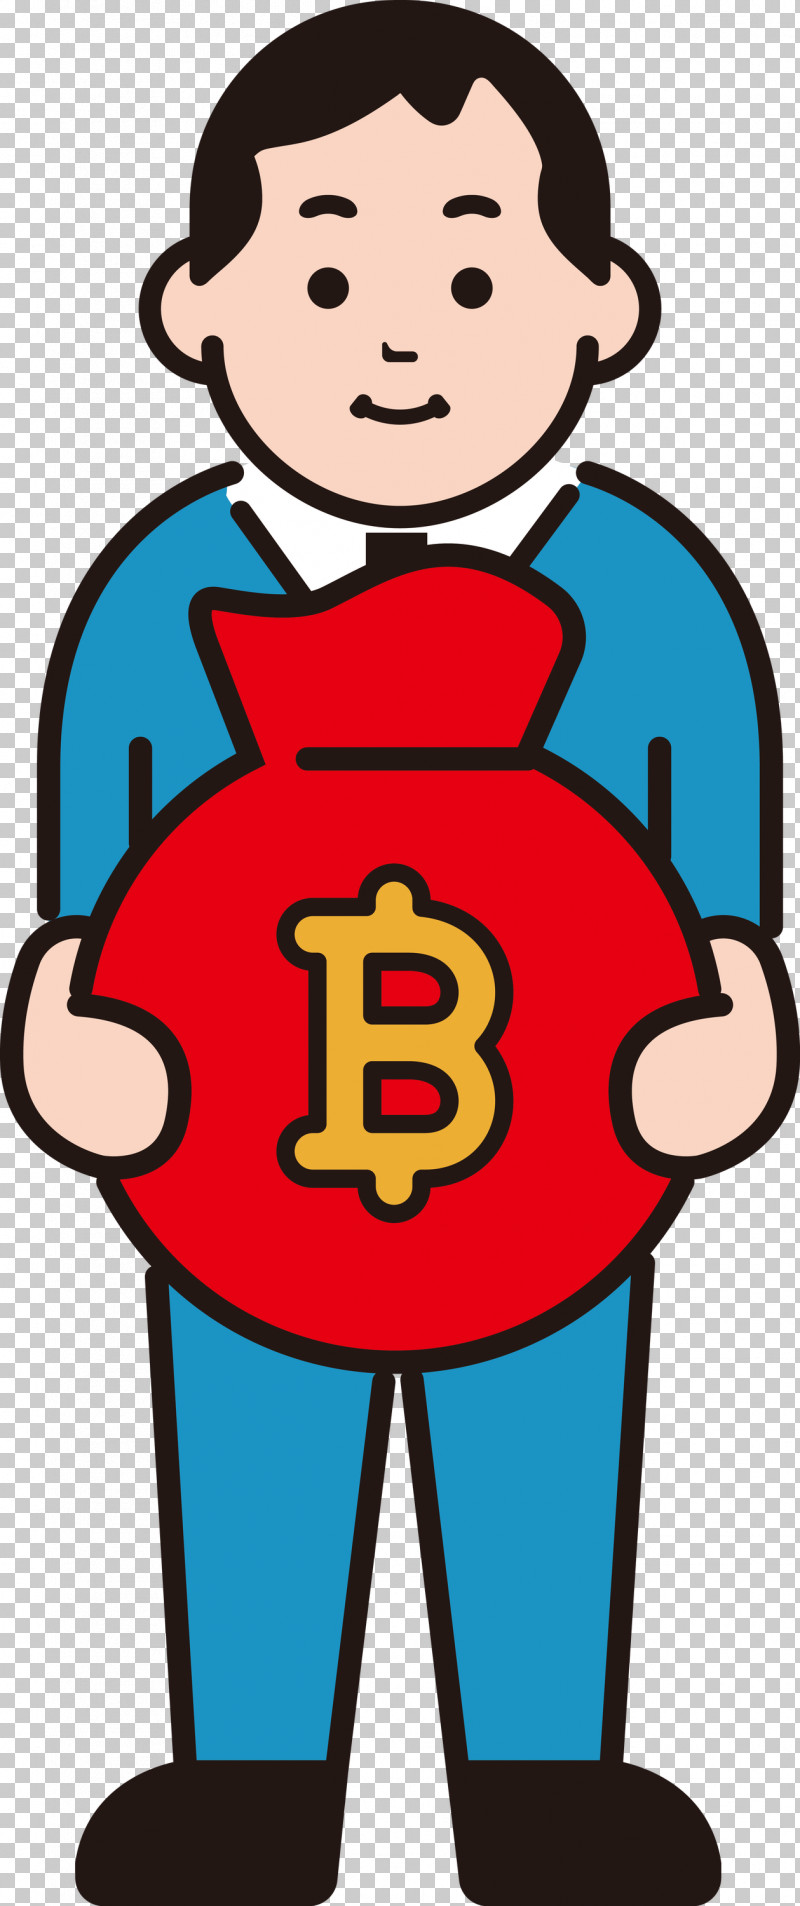 Bitcoin Virtual Currency PNG, Clipart, Animation, Bitcoin, Caricature, Cartoon, Drawing Free PNG Download